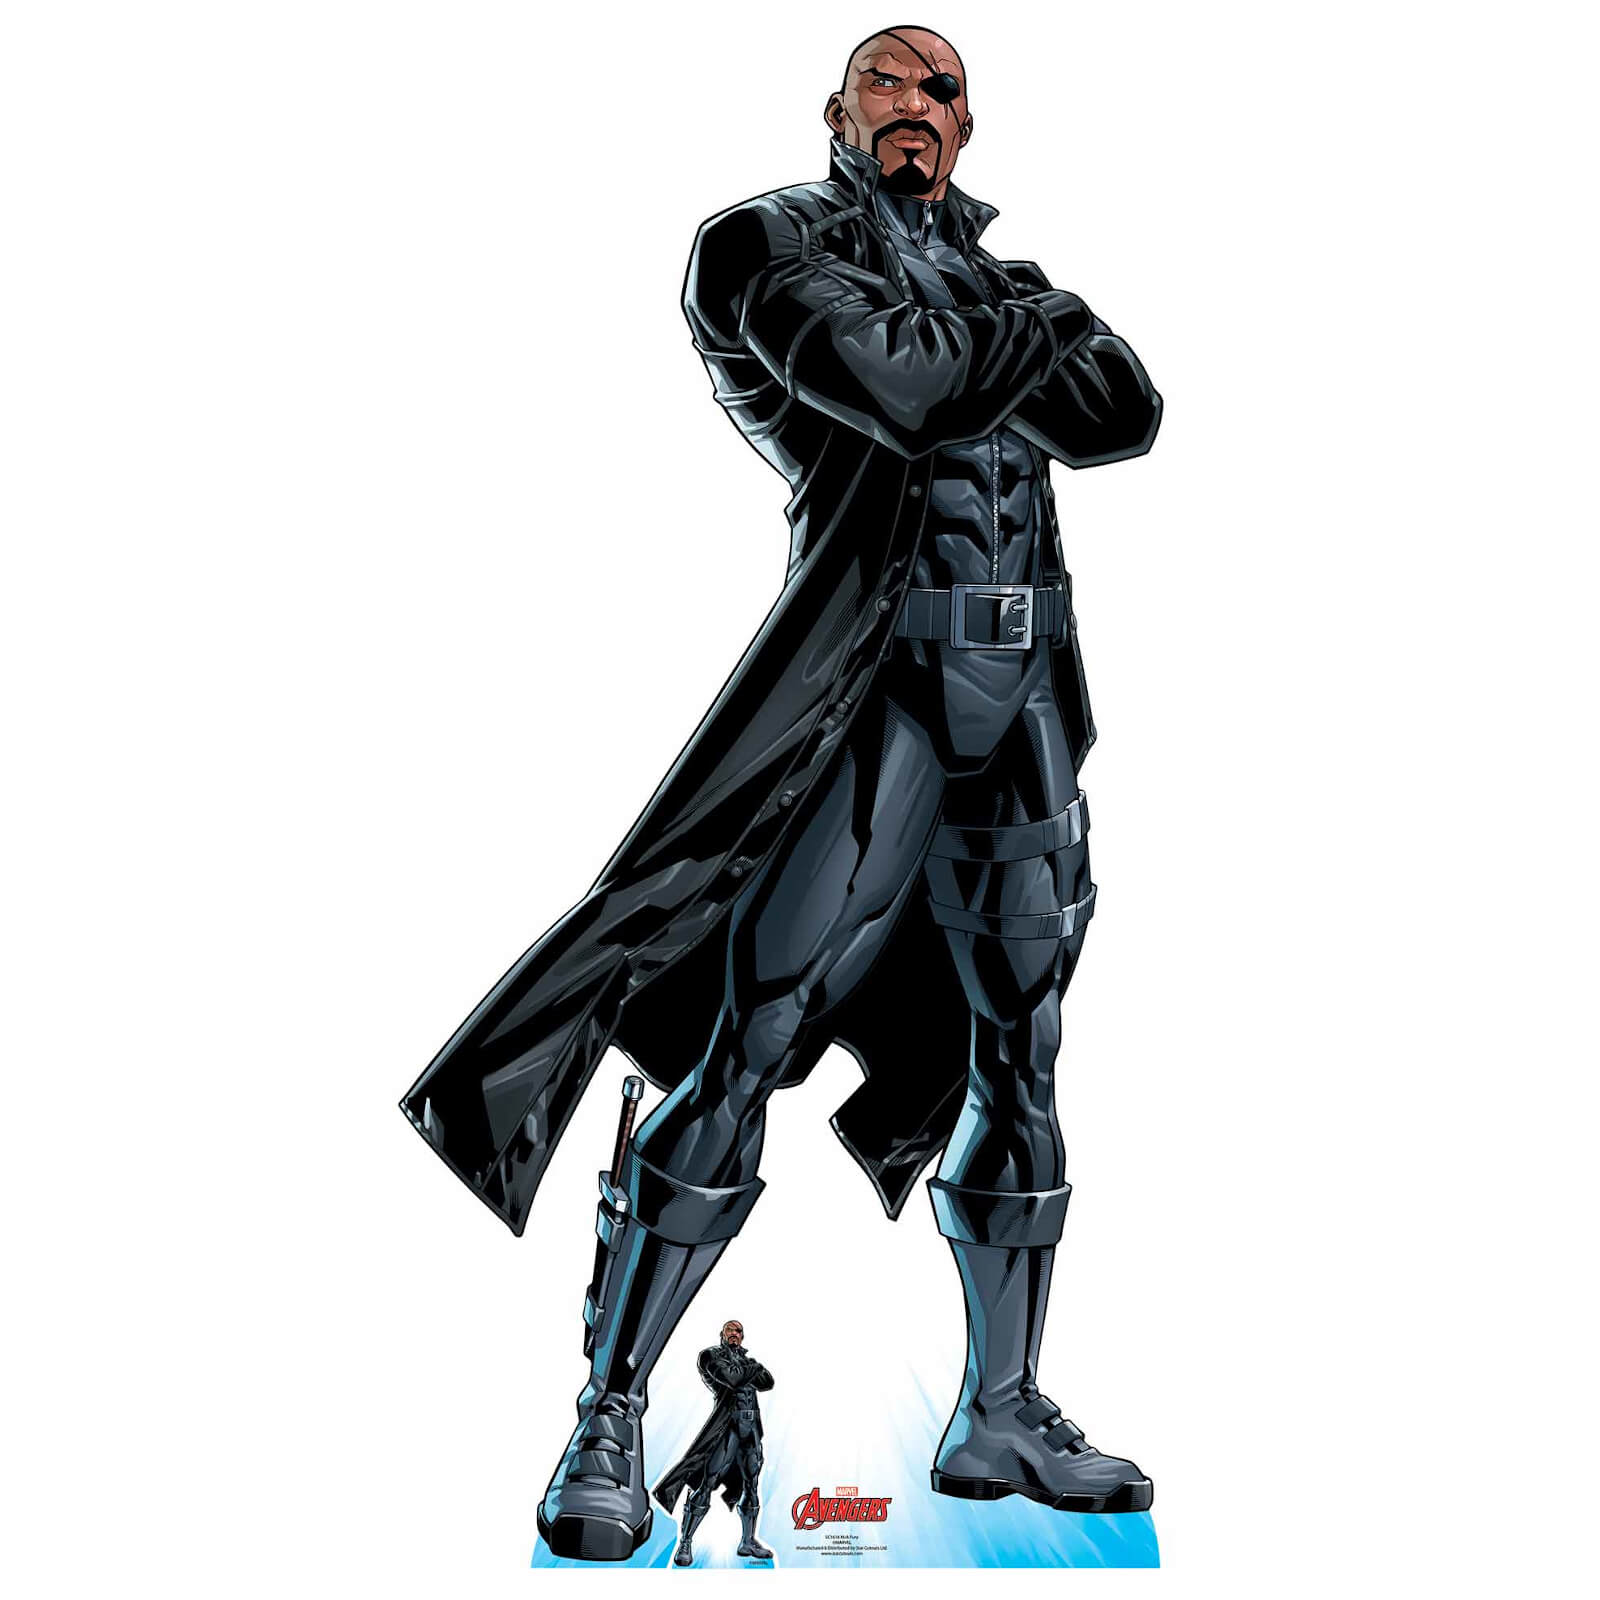 The Avengers Nick Fury Oversized Cardboard Cut Out